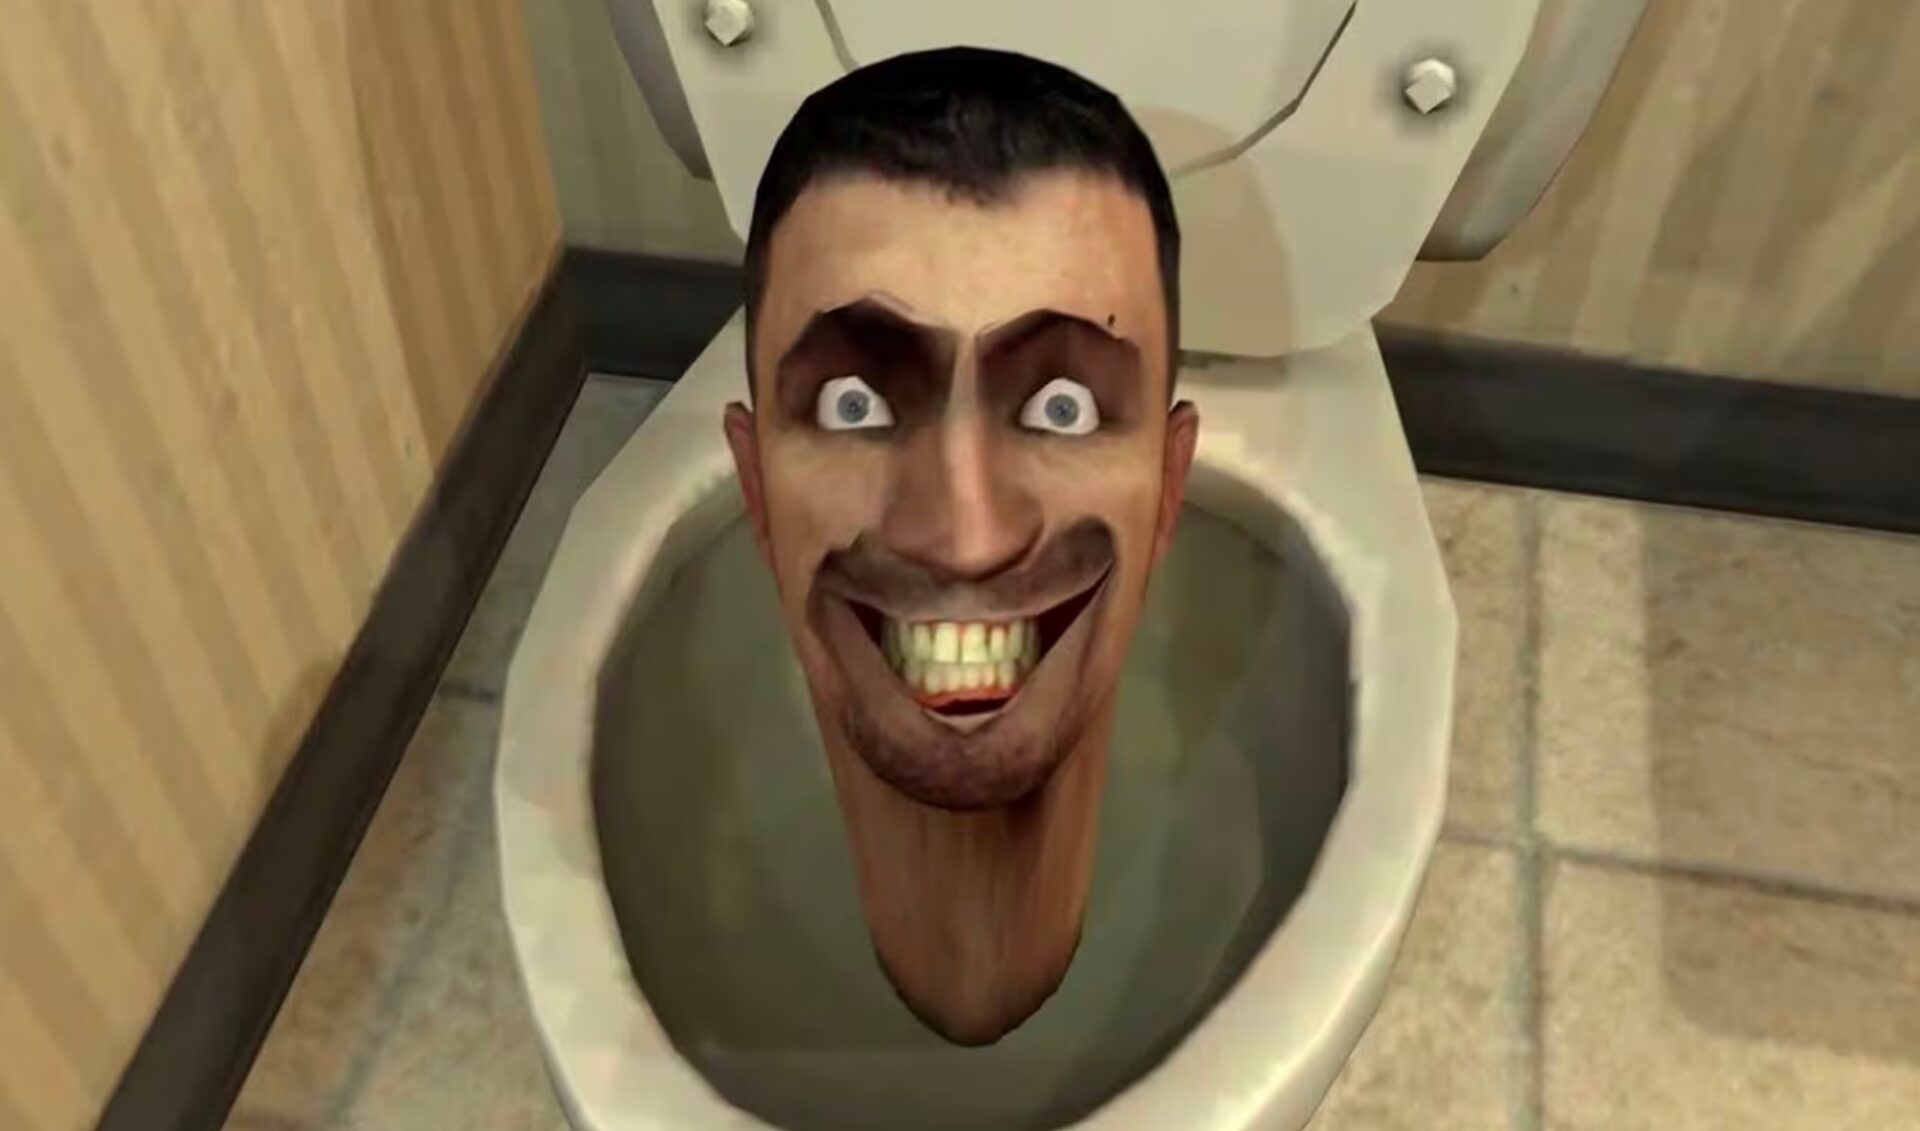 YouTube chooses the freaky Skibidi Toilet meme as its top trend of the year